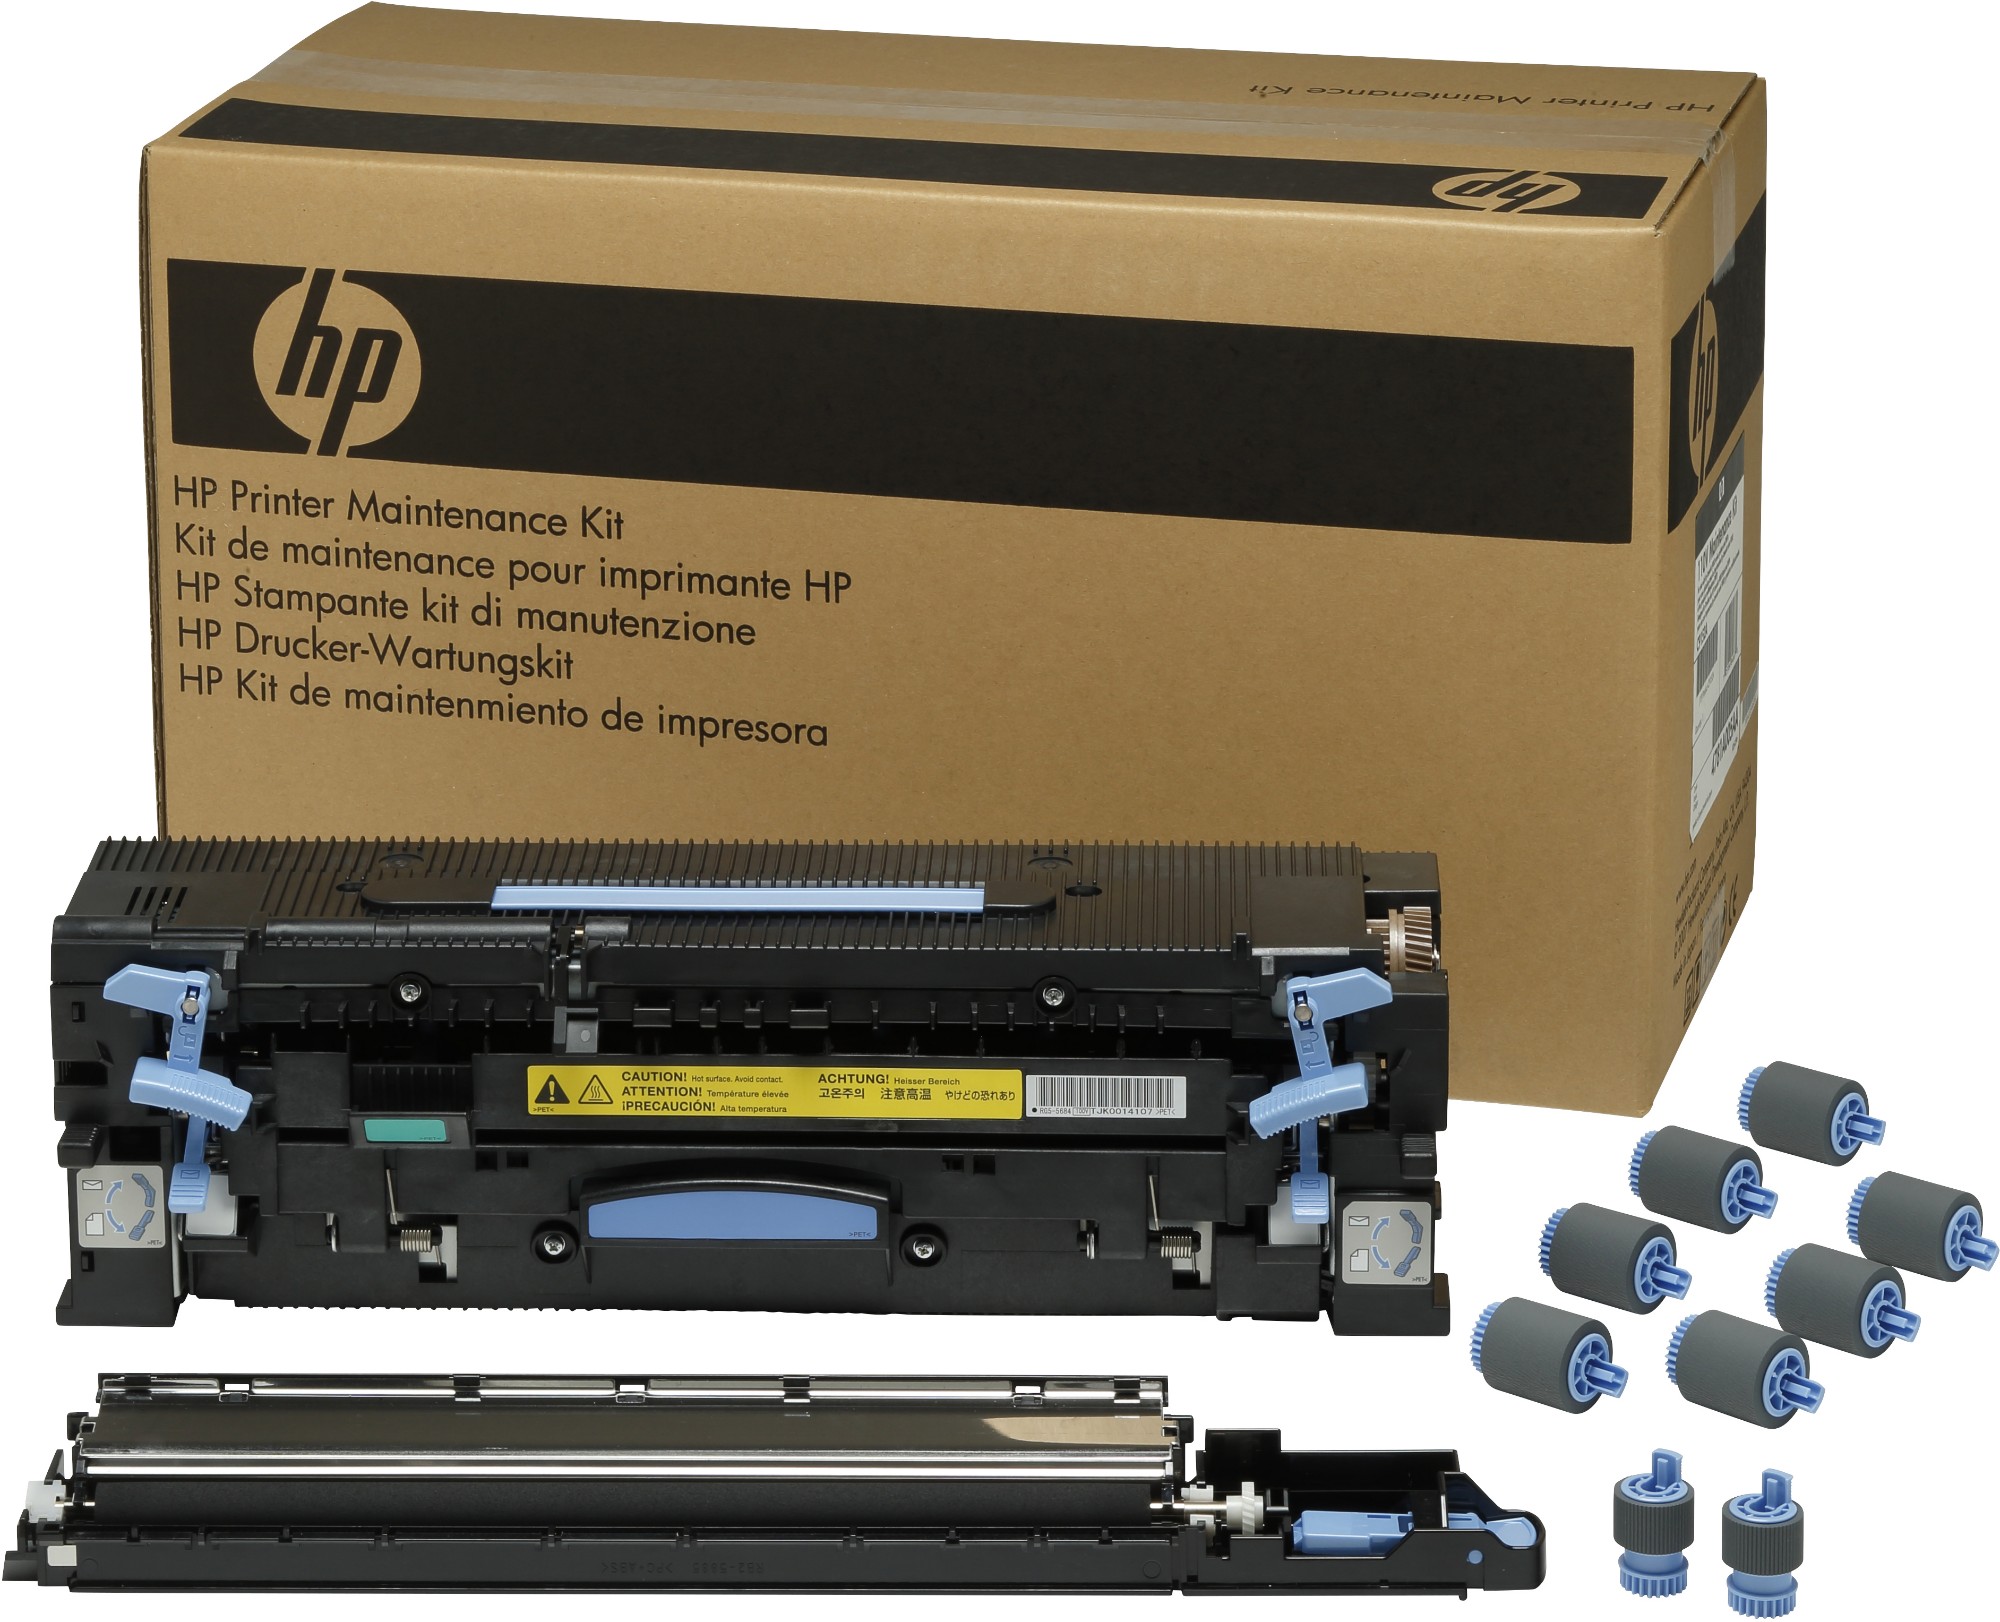 HP C9153A Maintenance-kit 220V, 350K pages for Canon LBP-5060/Troy 9000